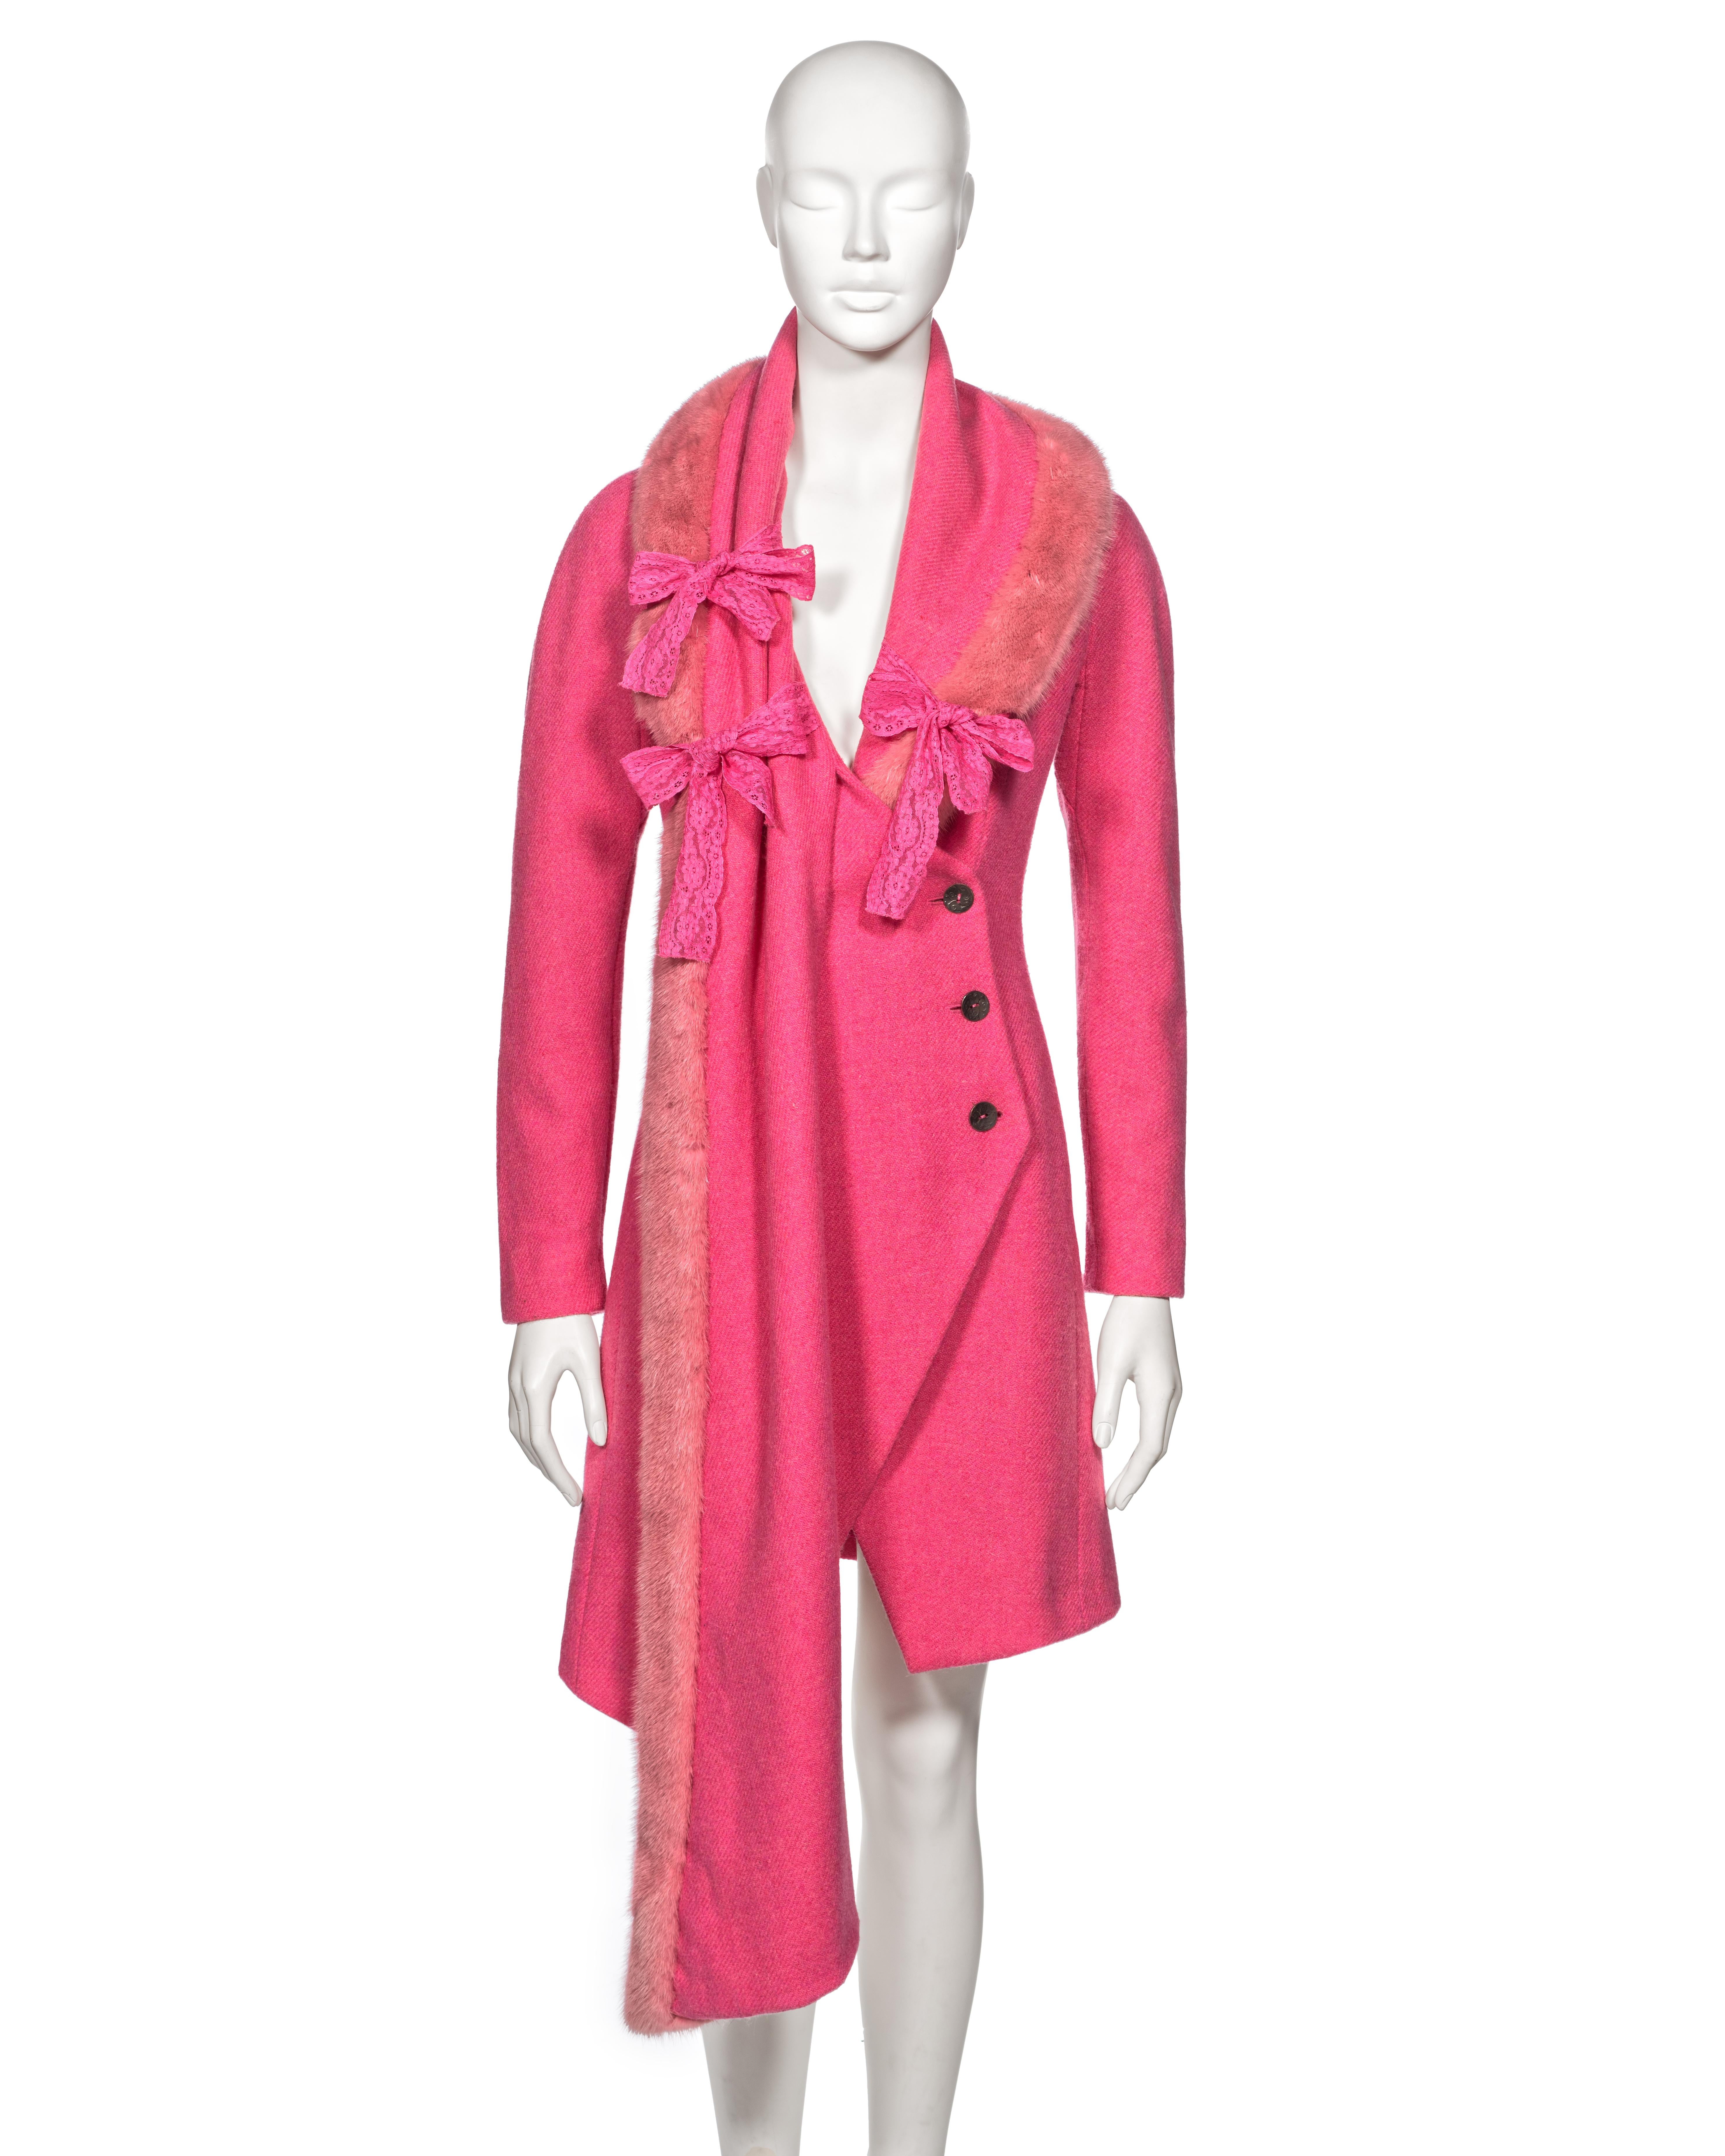 Christian Dior by John Galliano Pink Tweed Coat With Mink Fur Collar, fw 1998 For Sale 9